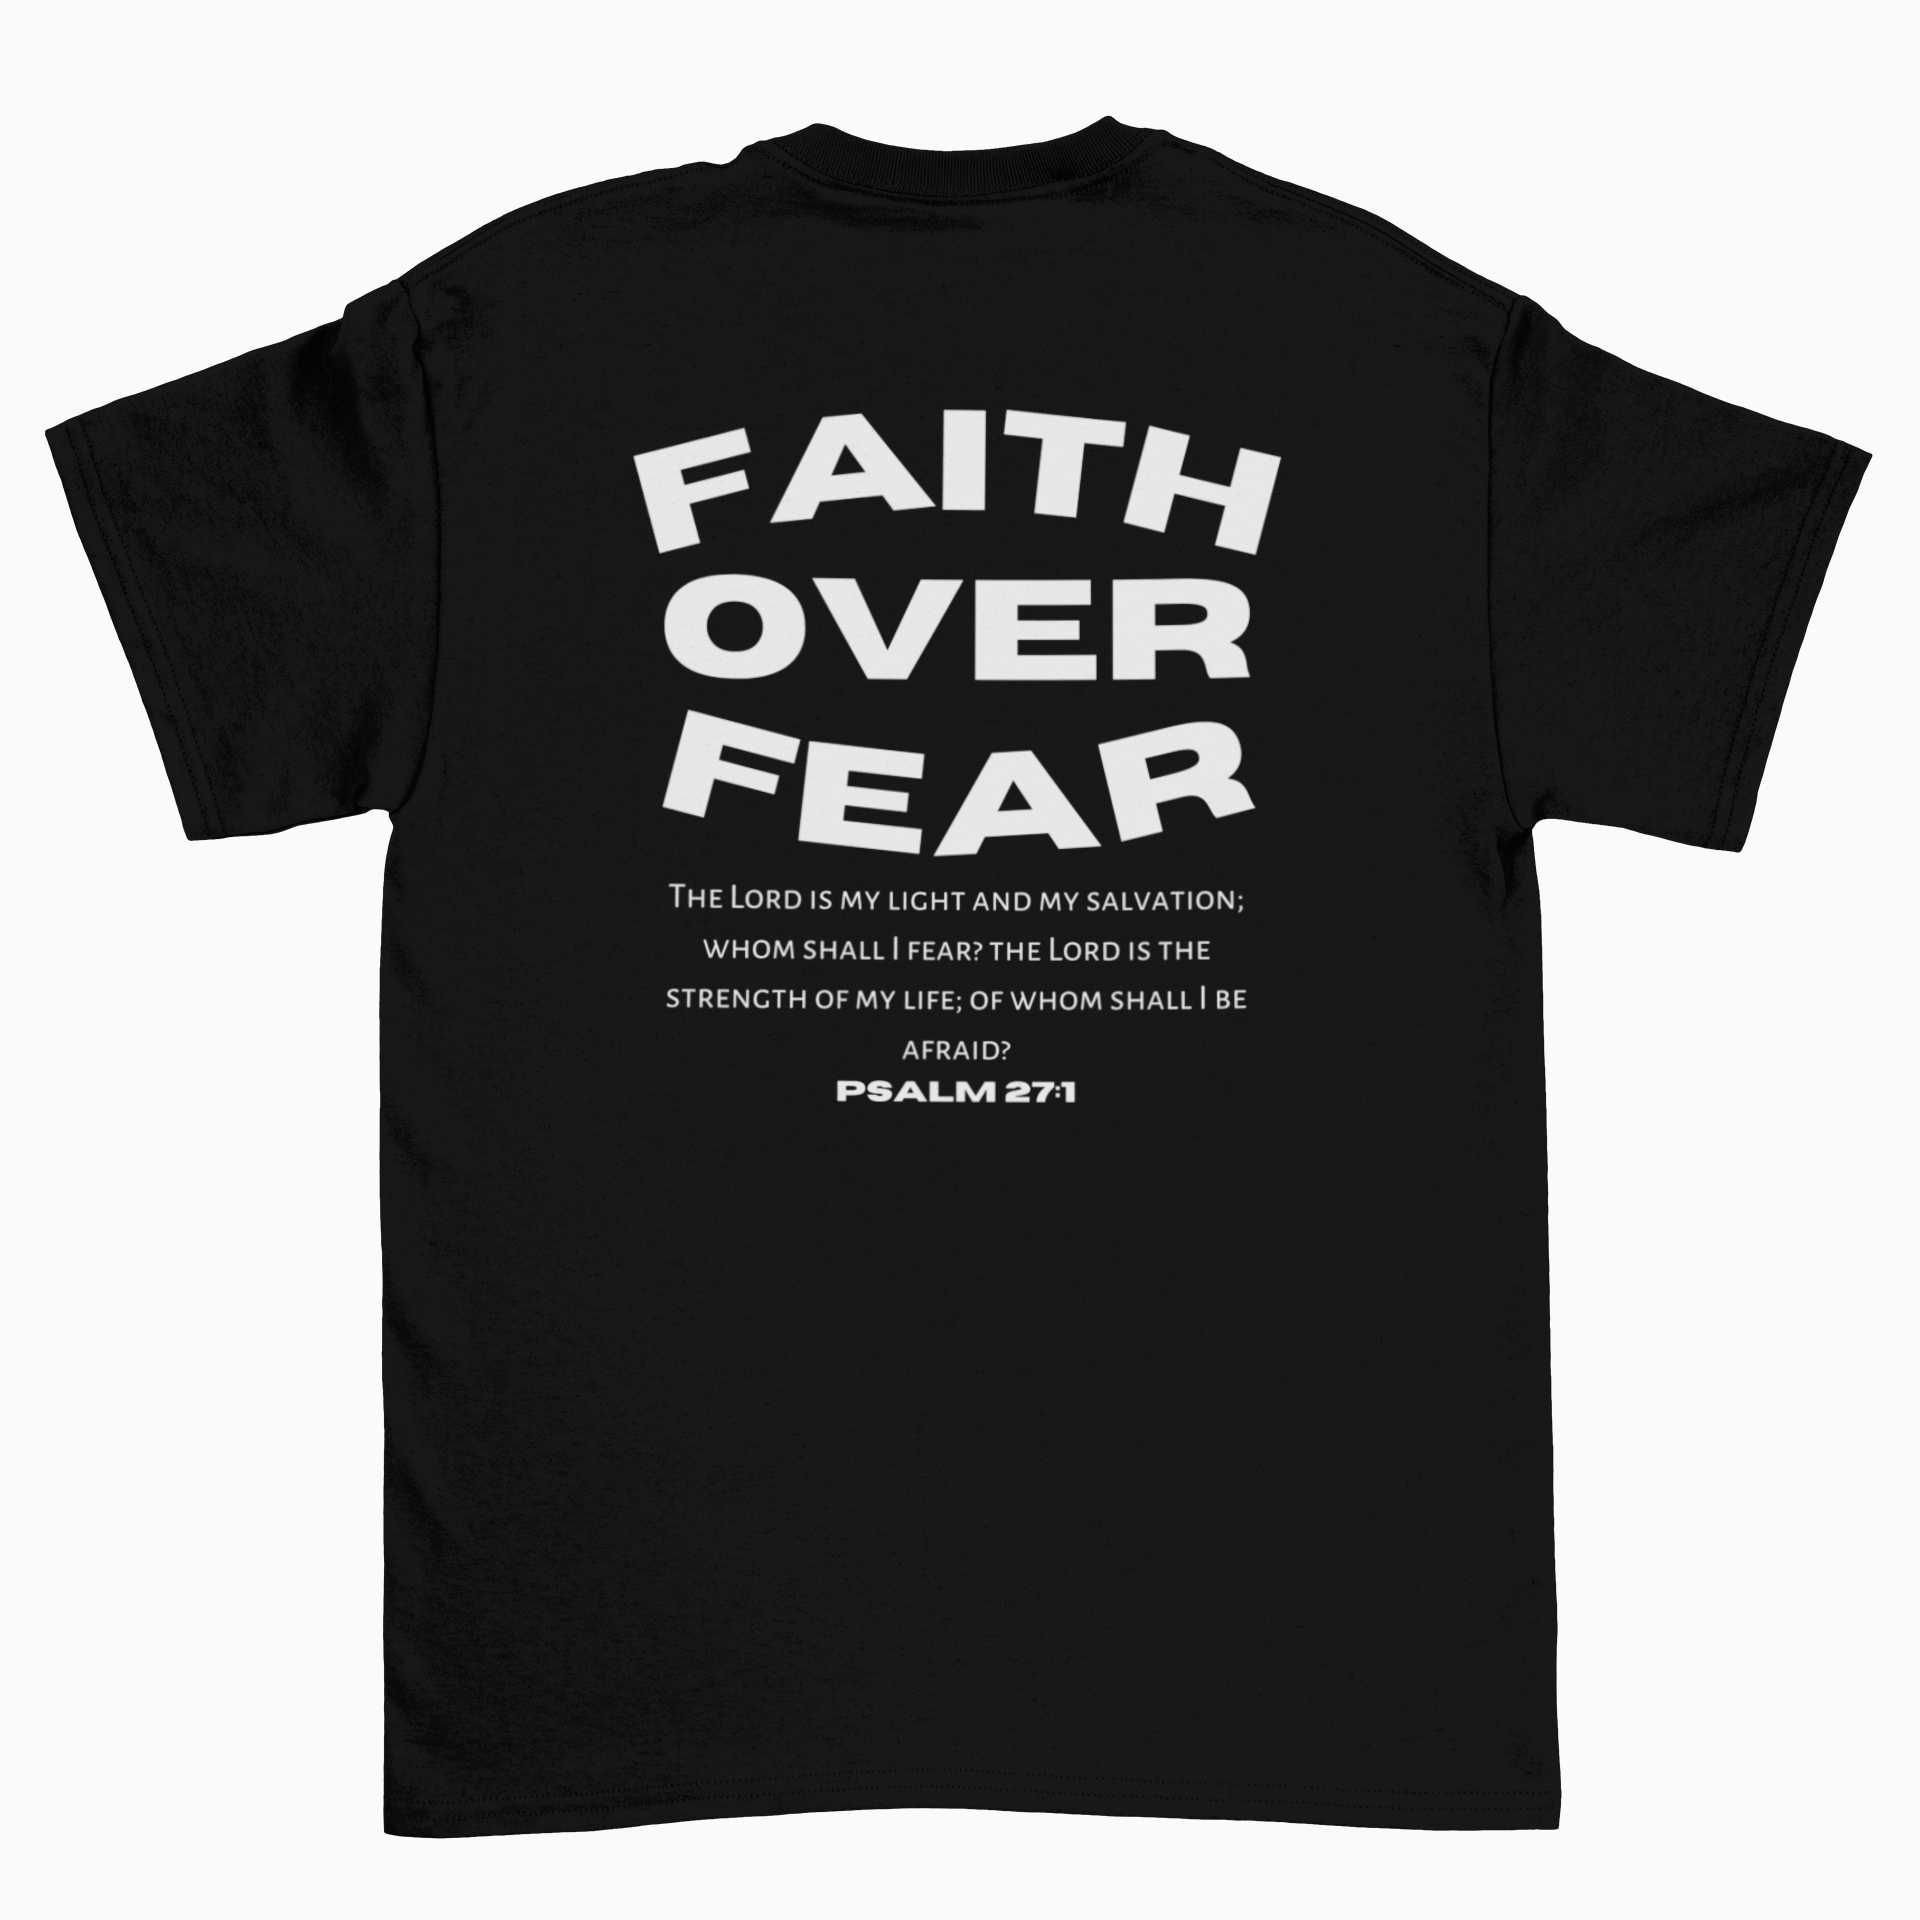 Compare faith over fear Prices 12/2023. Lowest Price 10.69